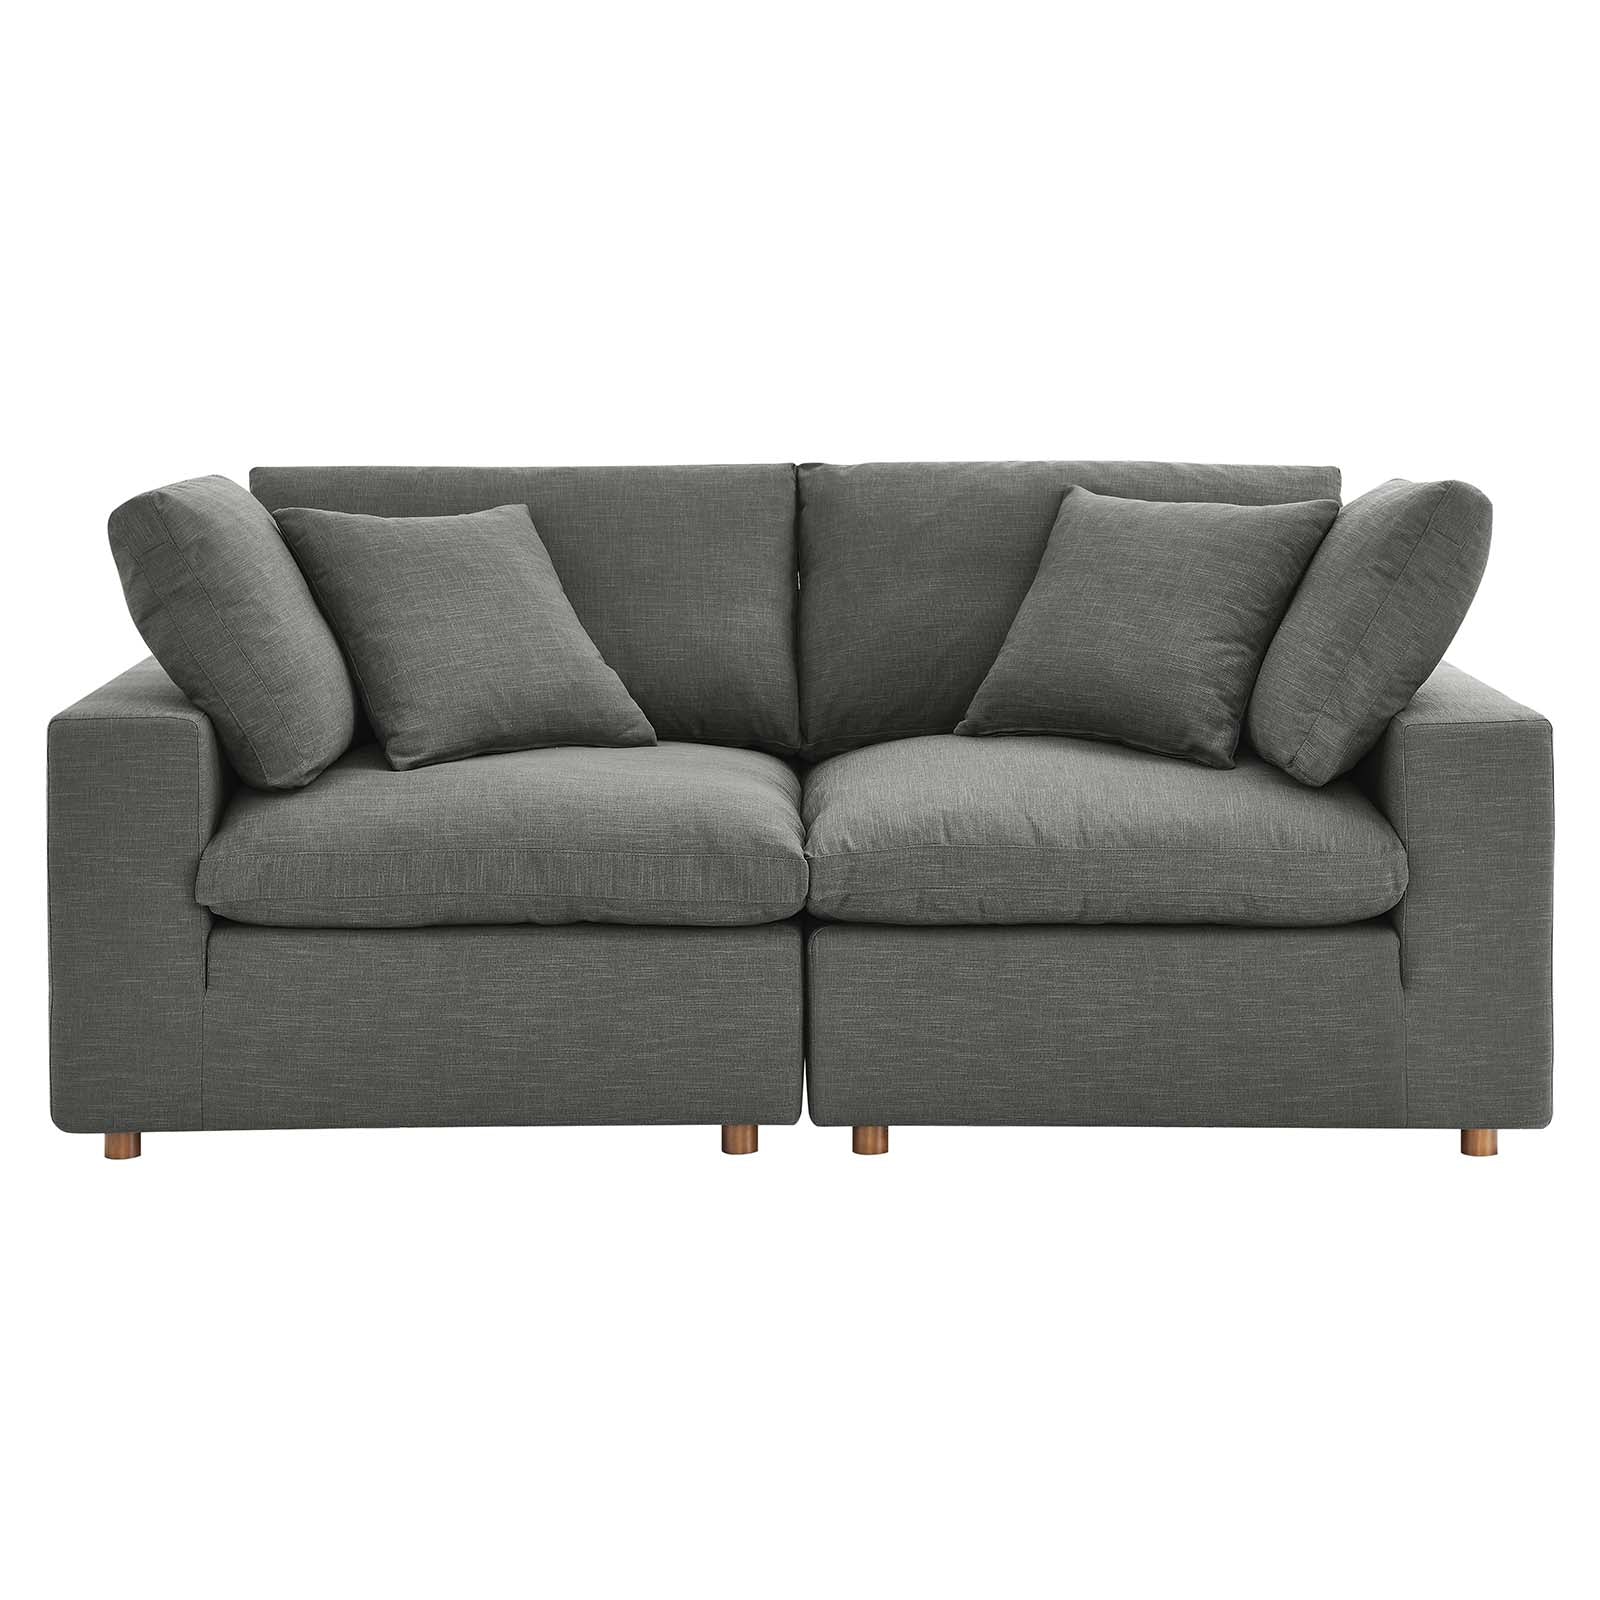 Modway Living Room Sets - Commix Down Filled Overstuffed 2 Piece Sectional Sofa Set Gray